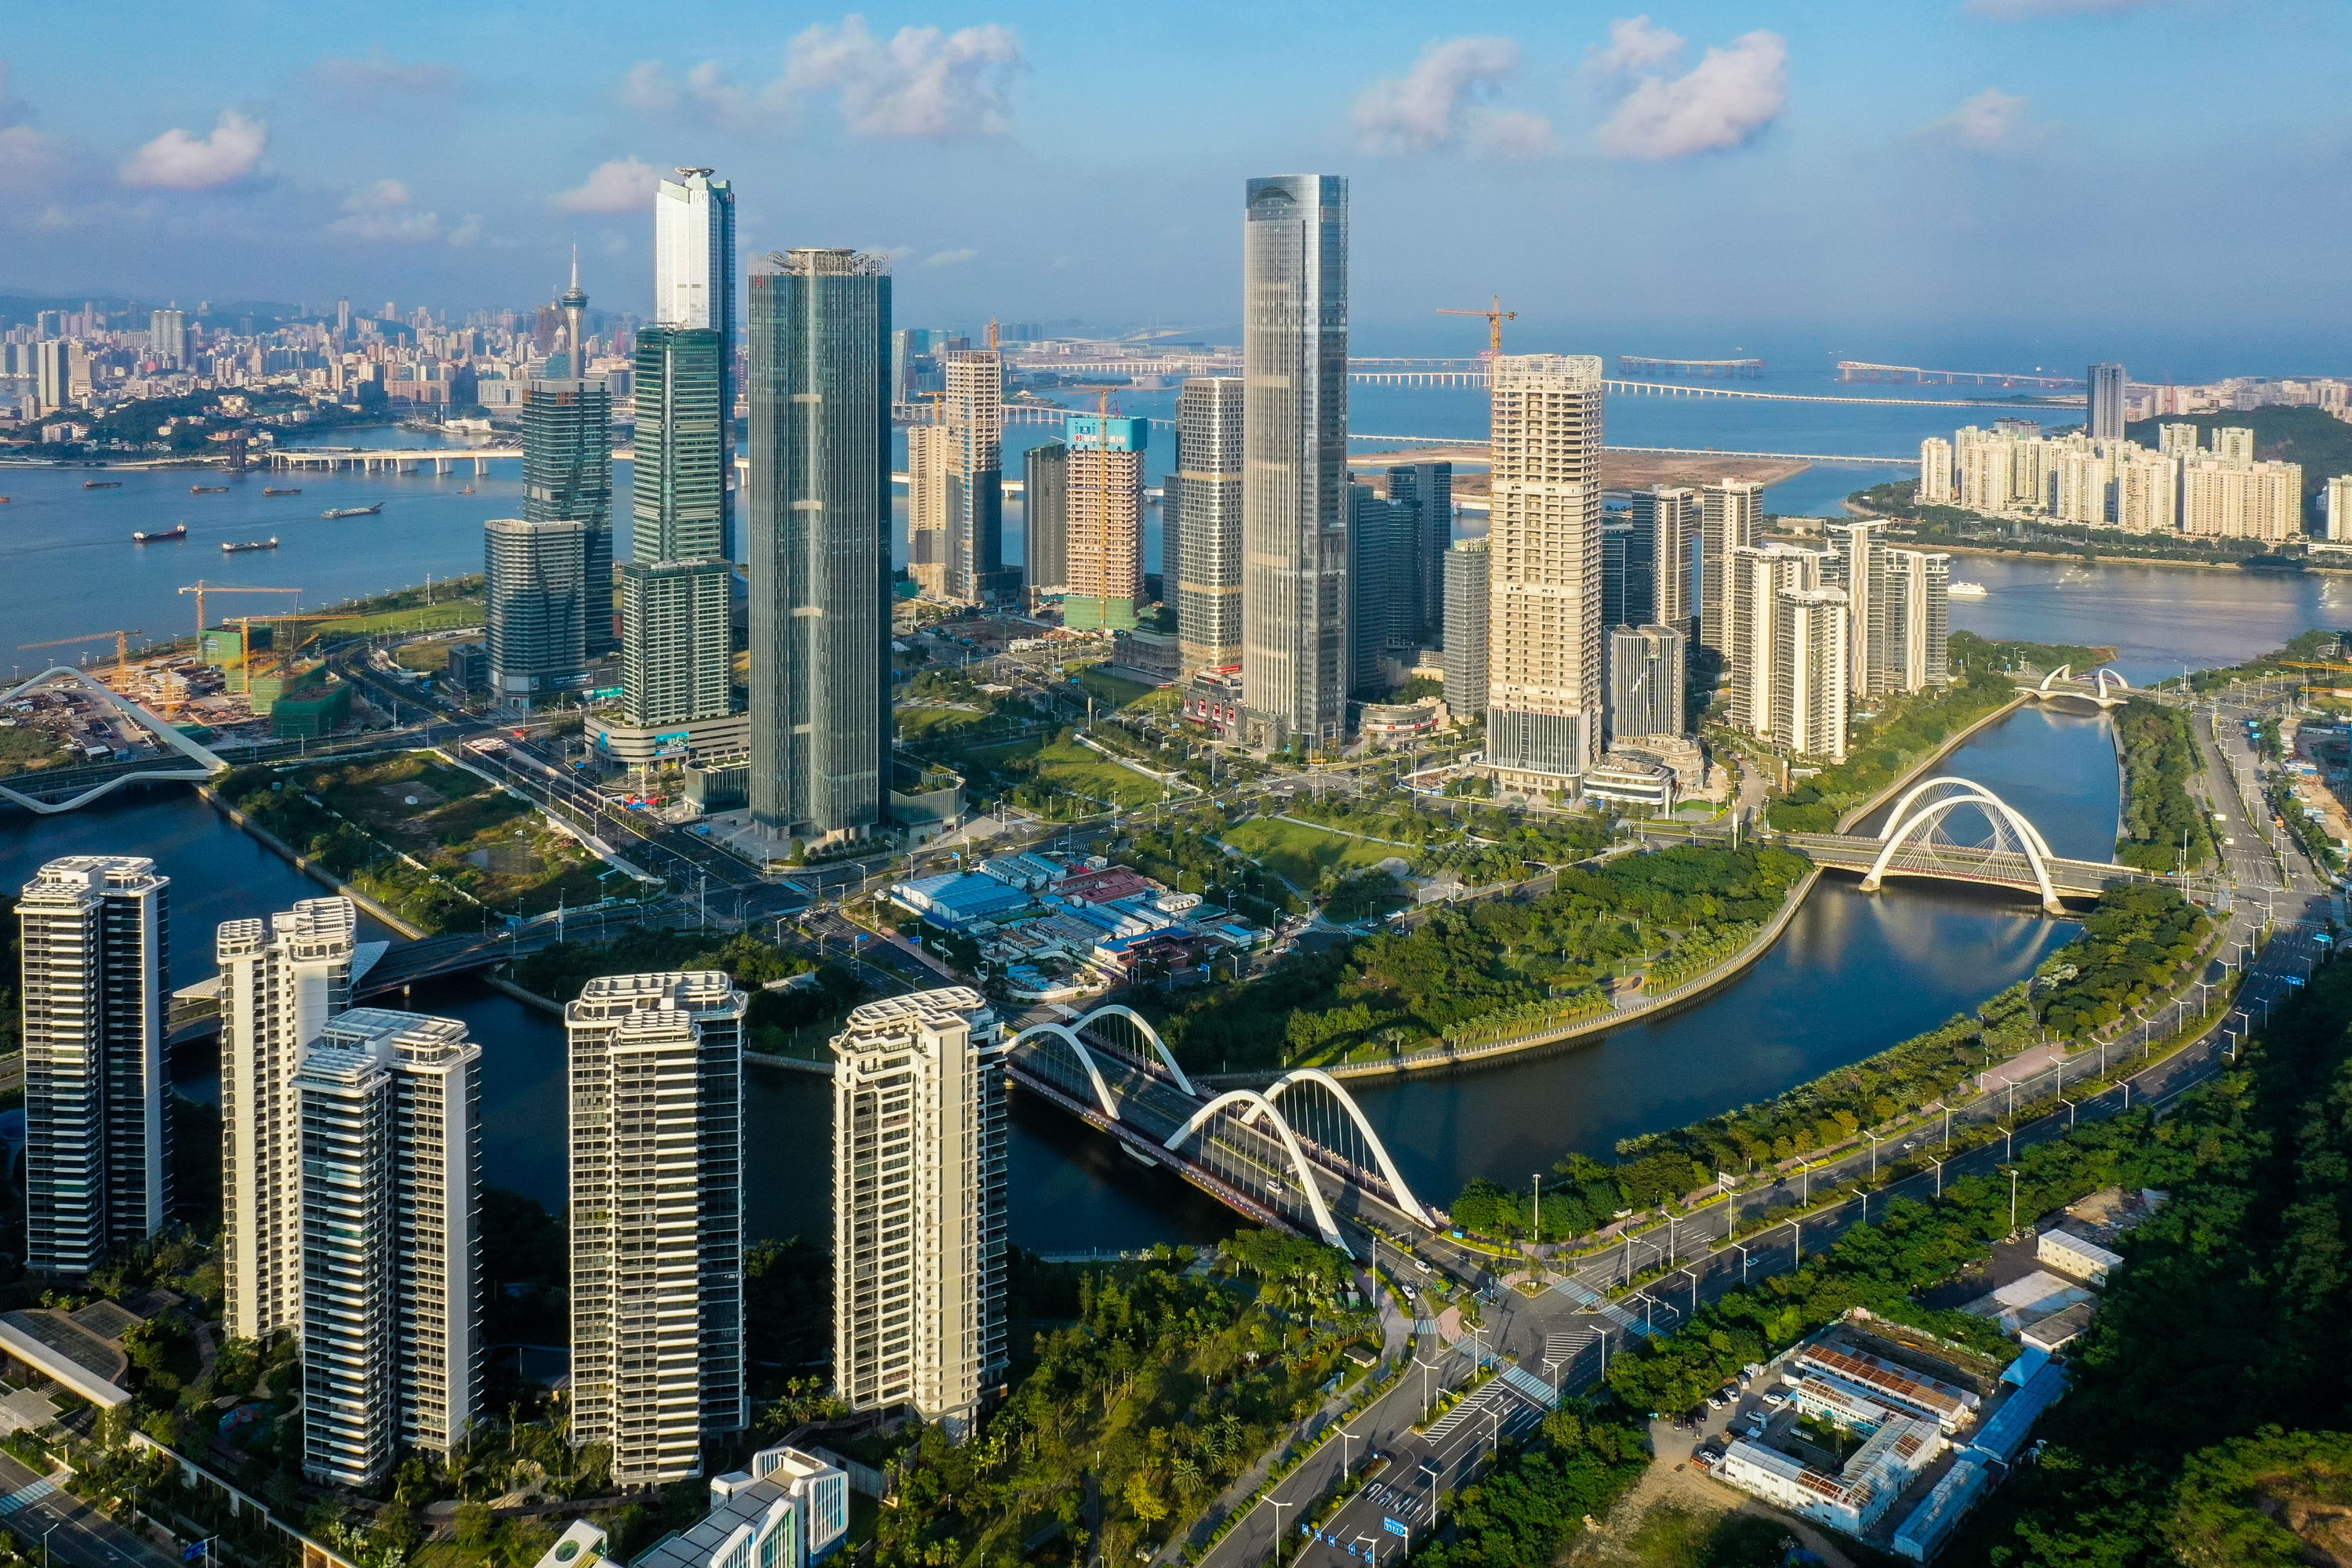 A view of the Hengqin International Financial Center in Zhuhai, in South China’s Guangdong province. The Guangdong-Hong Kong-Macao Greater Bay Area, a city cluster, is one of the most open areas in China with economic vitality. The Greater Bay Area is composed of nine cities in Guangdong Province including Guangzhou, Shenzhen, Zhuhai, Foshan, Huizhou, Dongguan, Zhongshan, Jiangmen and Zhaoqing, and two special administrative regions of Hong Kong and Macau. Photo: Xinhua